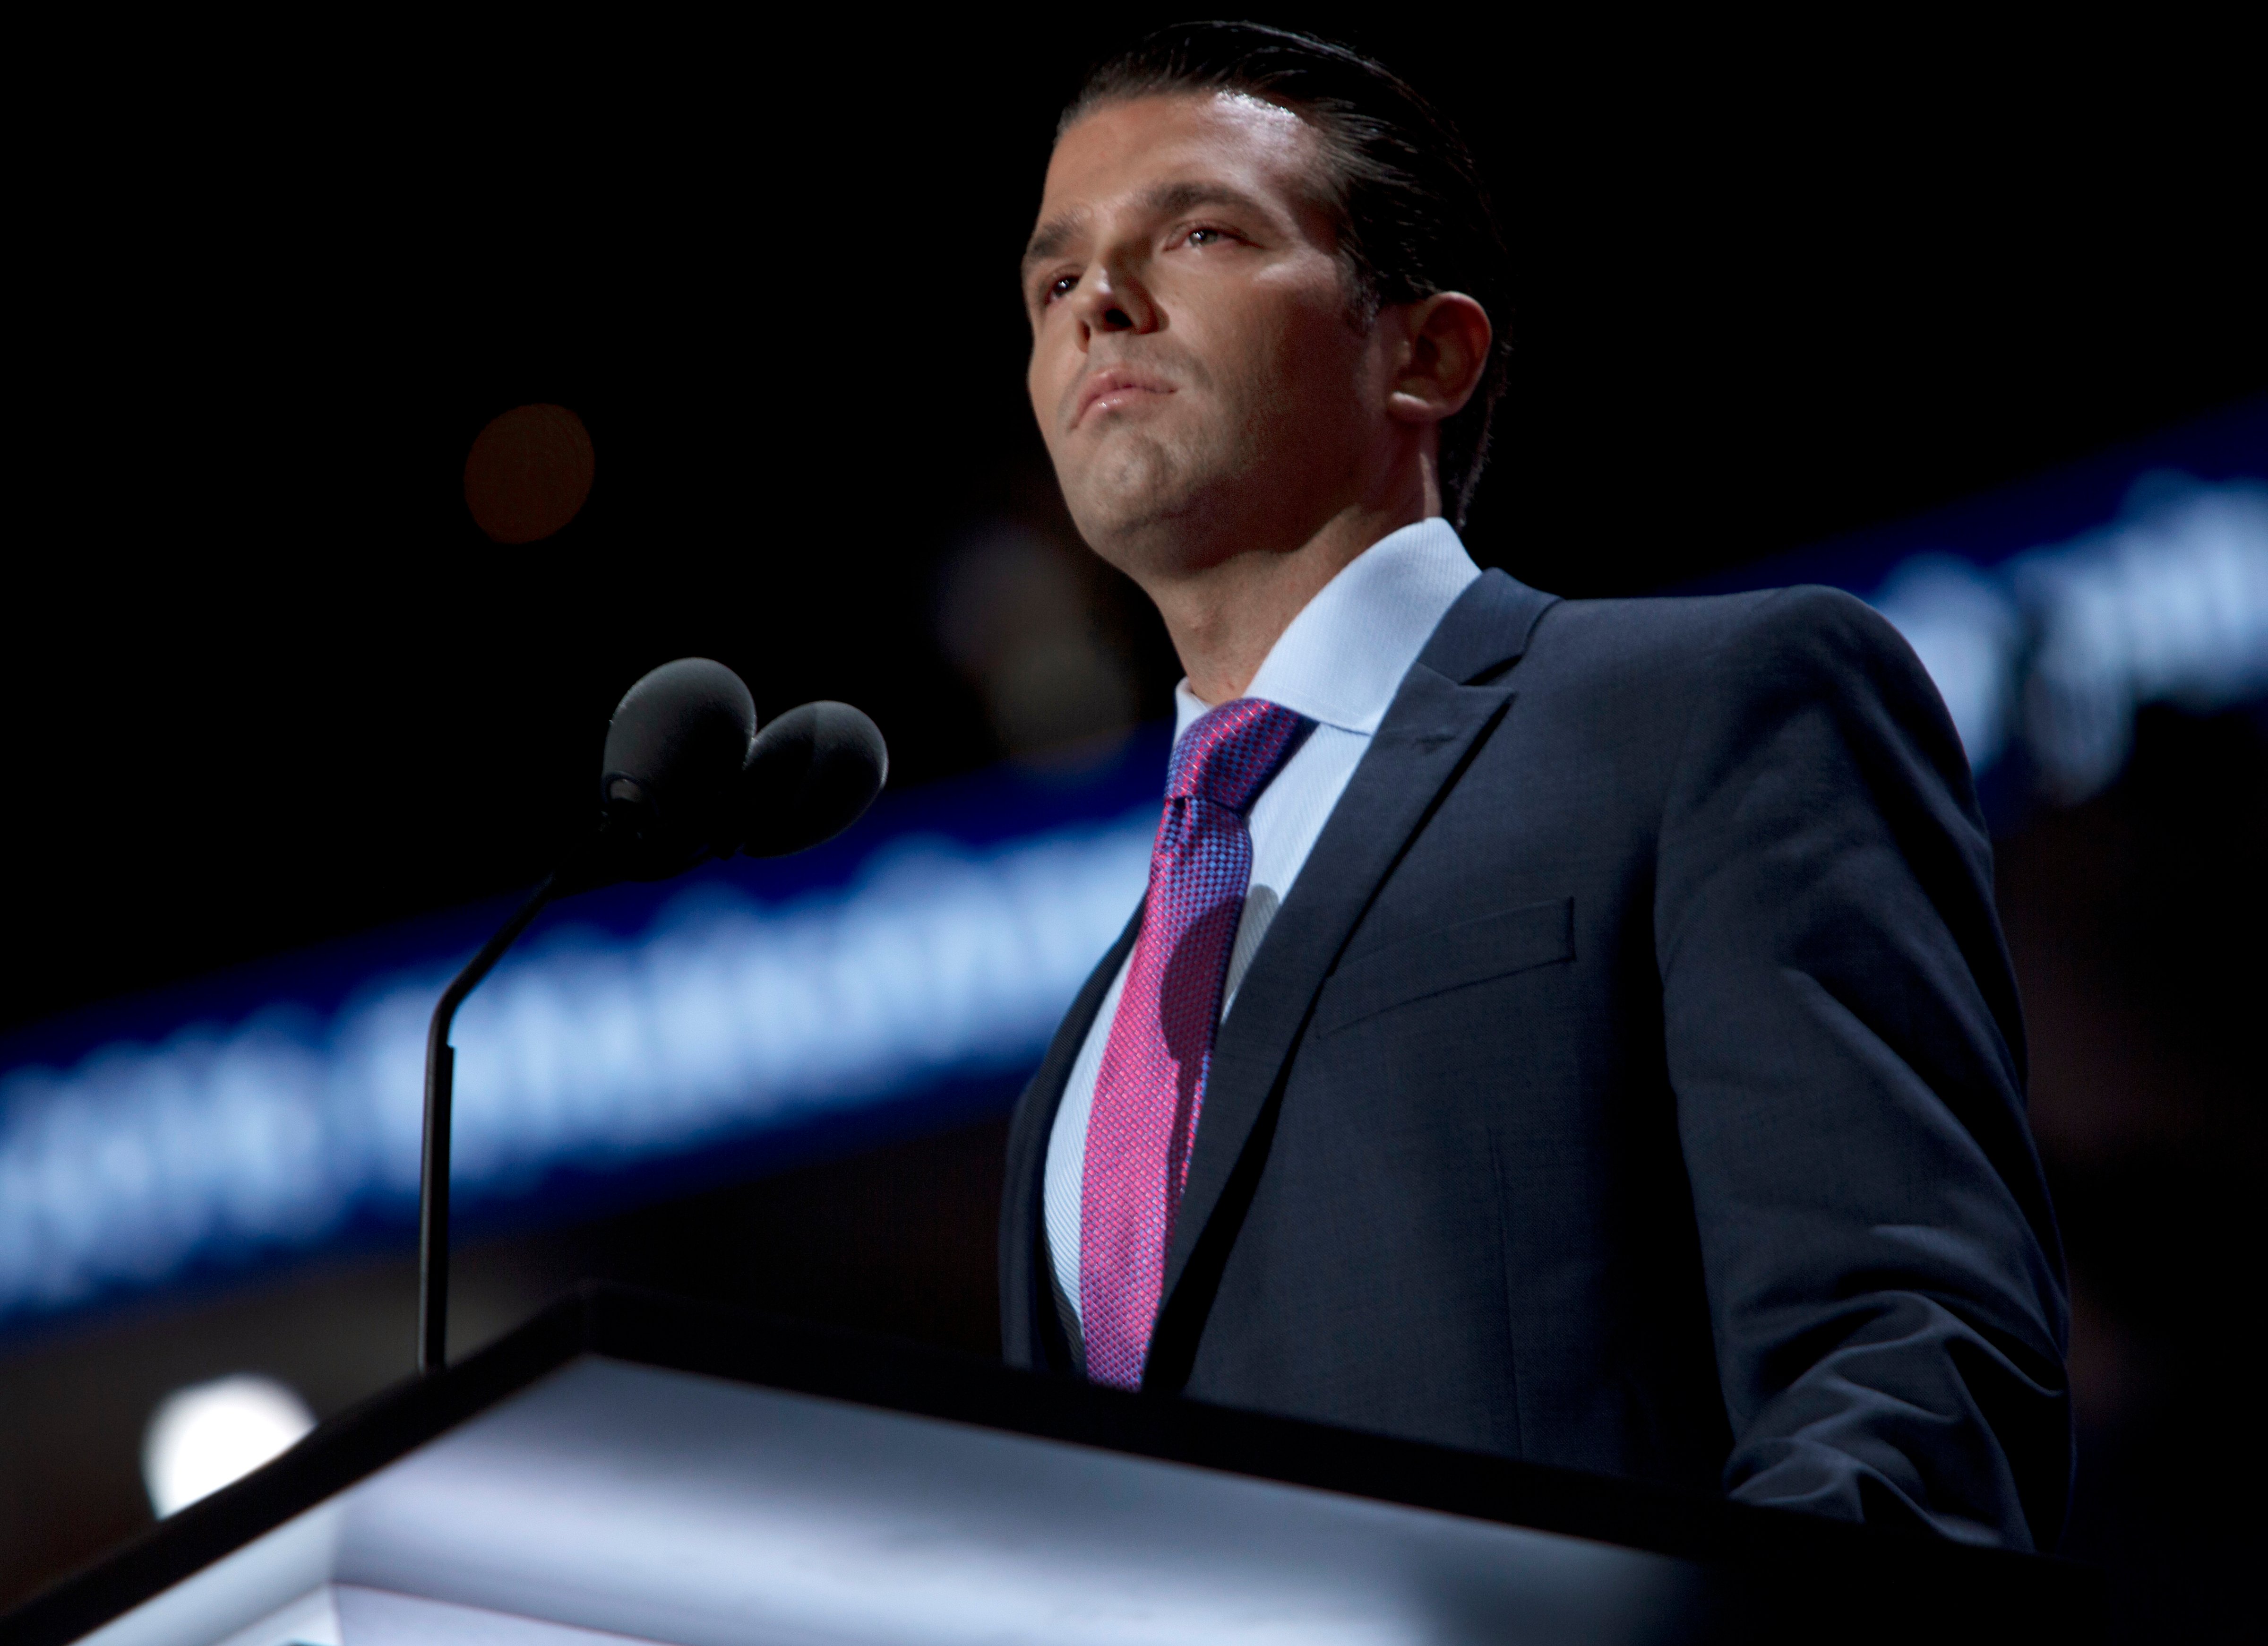 Donald Trump Jr. speaks at the Republican National Convention in Cleveland on July 19, 2016. (Christopher Morris—VII for TIME)